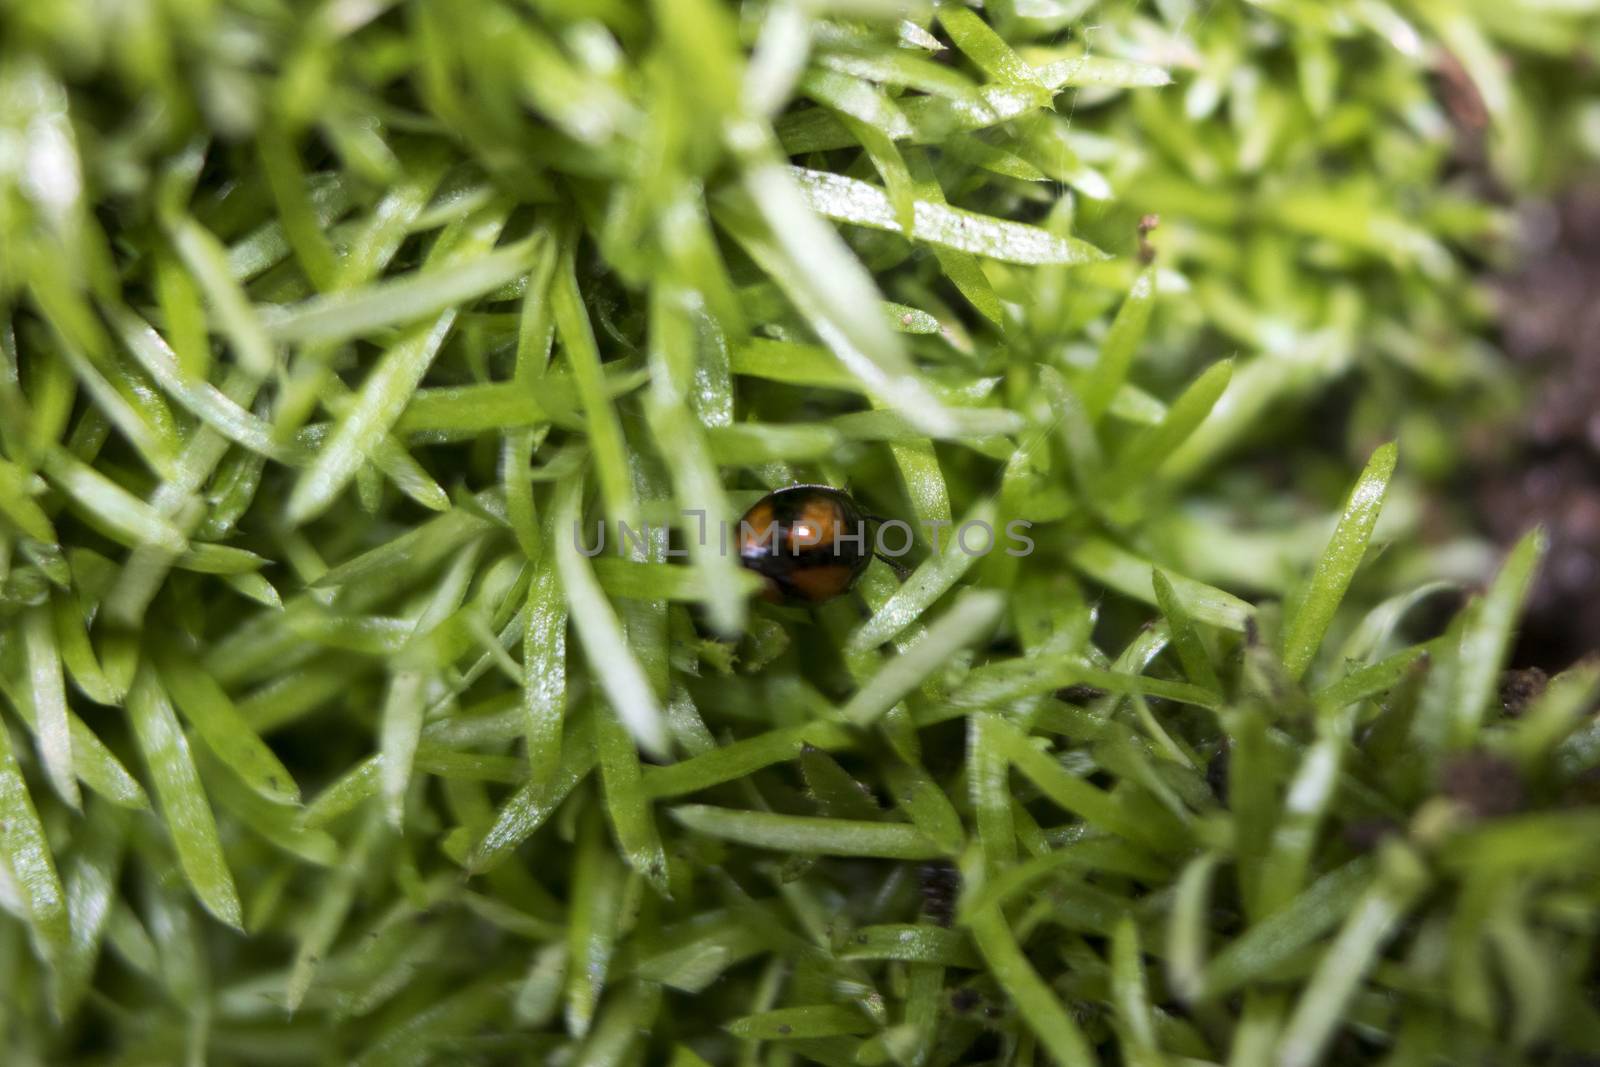 Little red ladybug crawling on a blade of grass on the green blurry background by vector1st